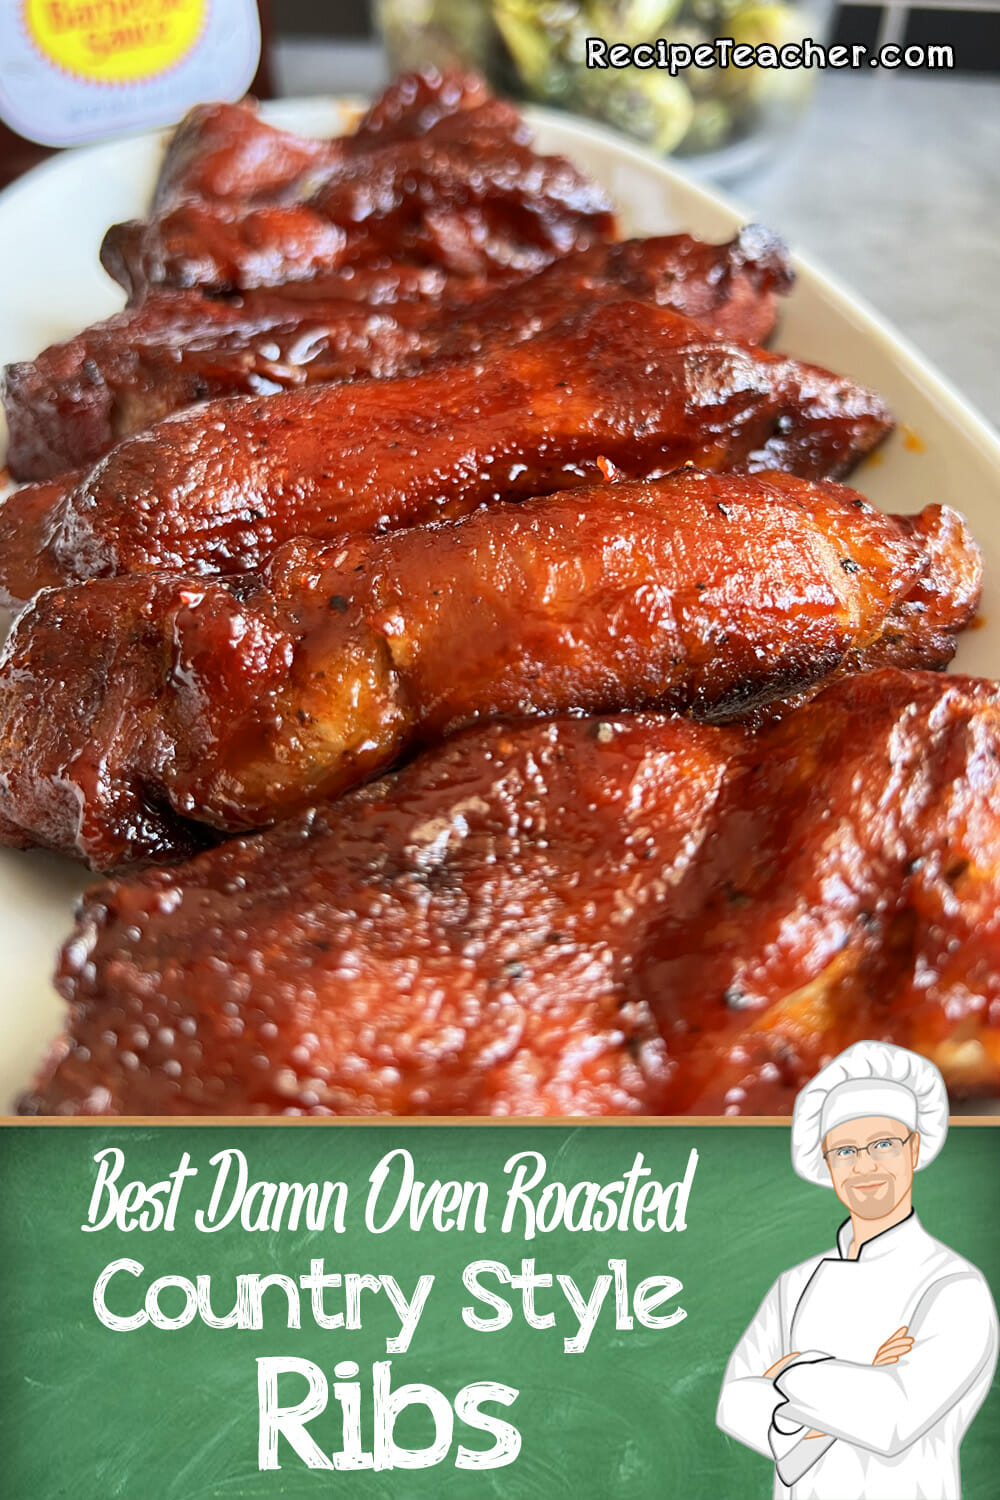 Oven roasted country style ribs